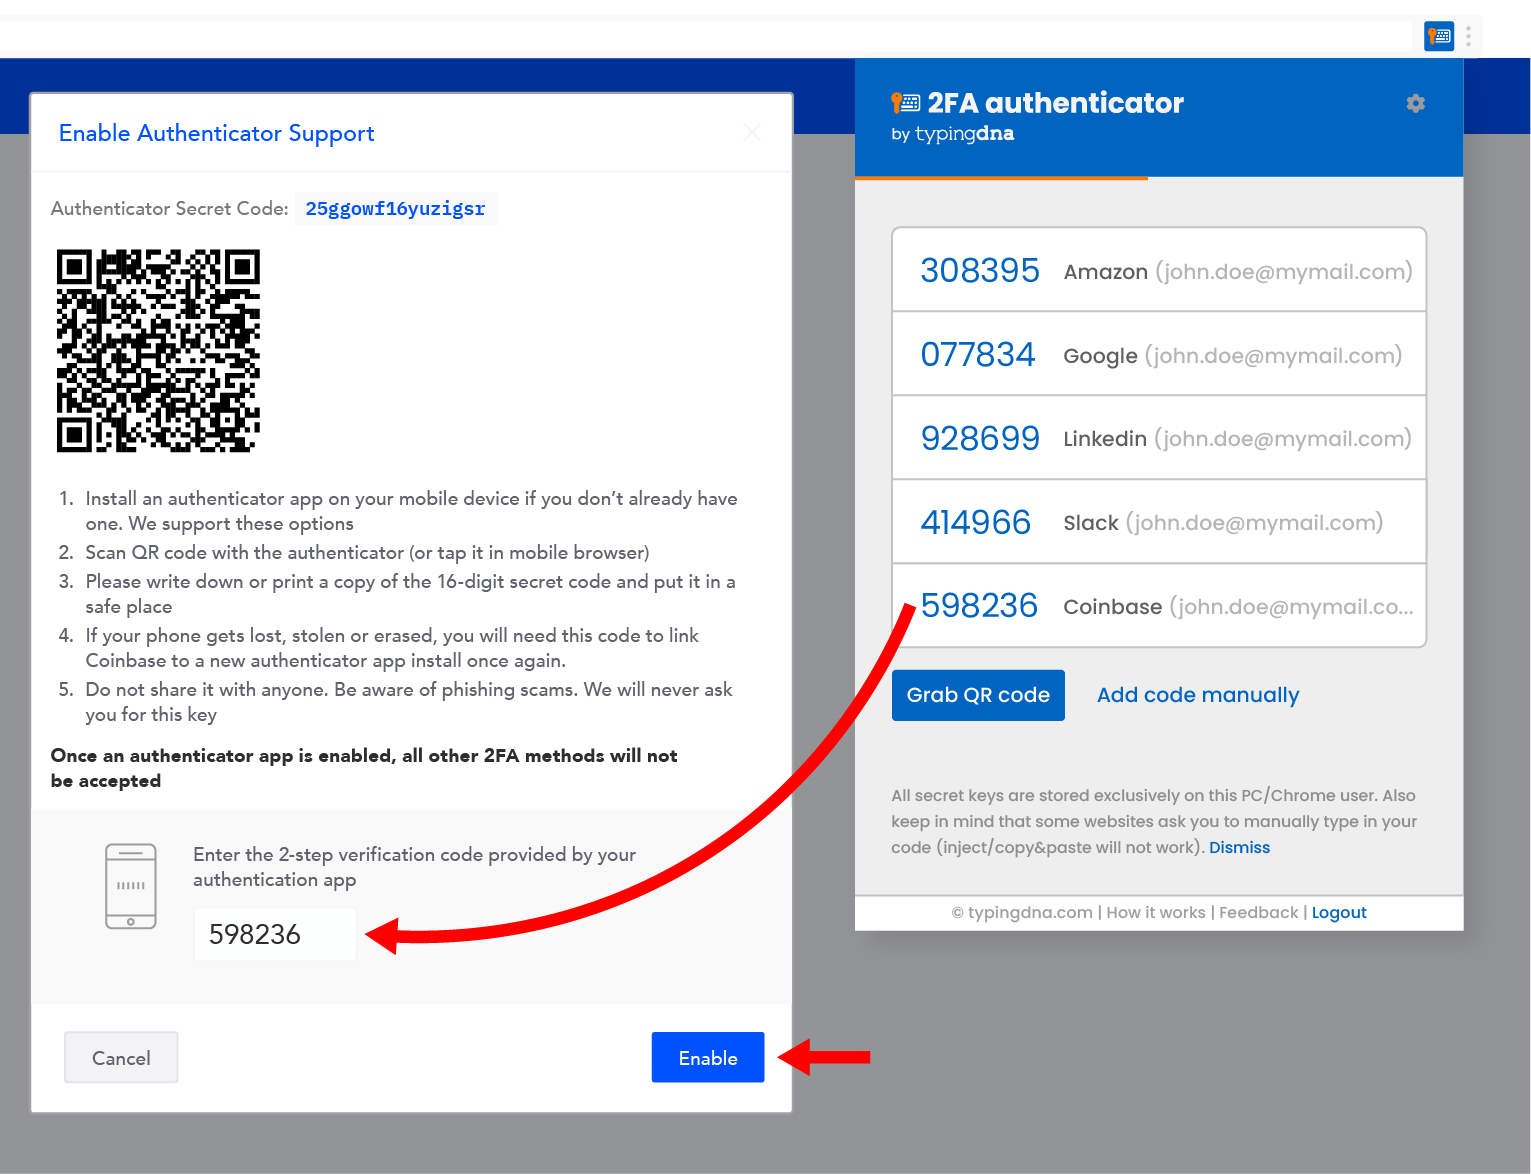 How to enable 2FA on Coinbase